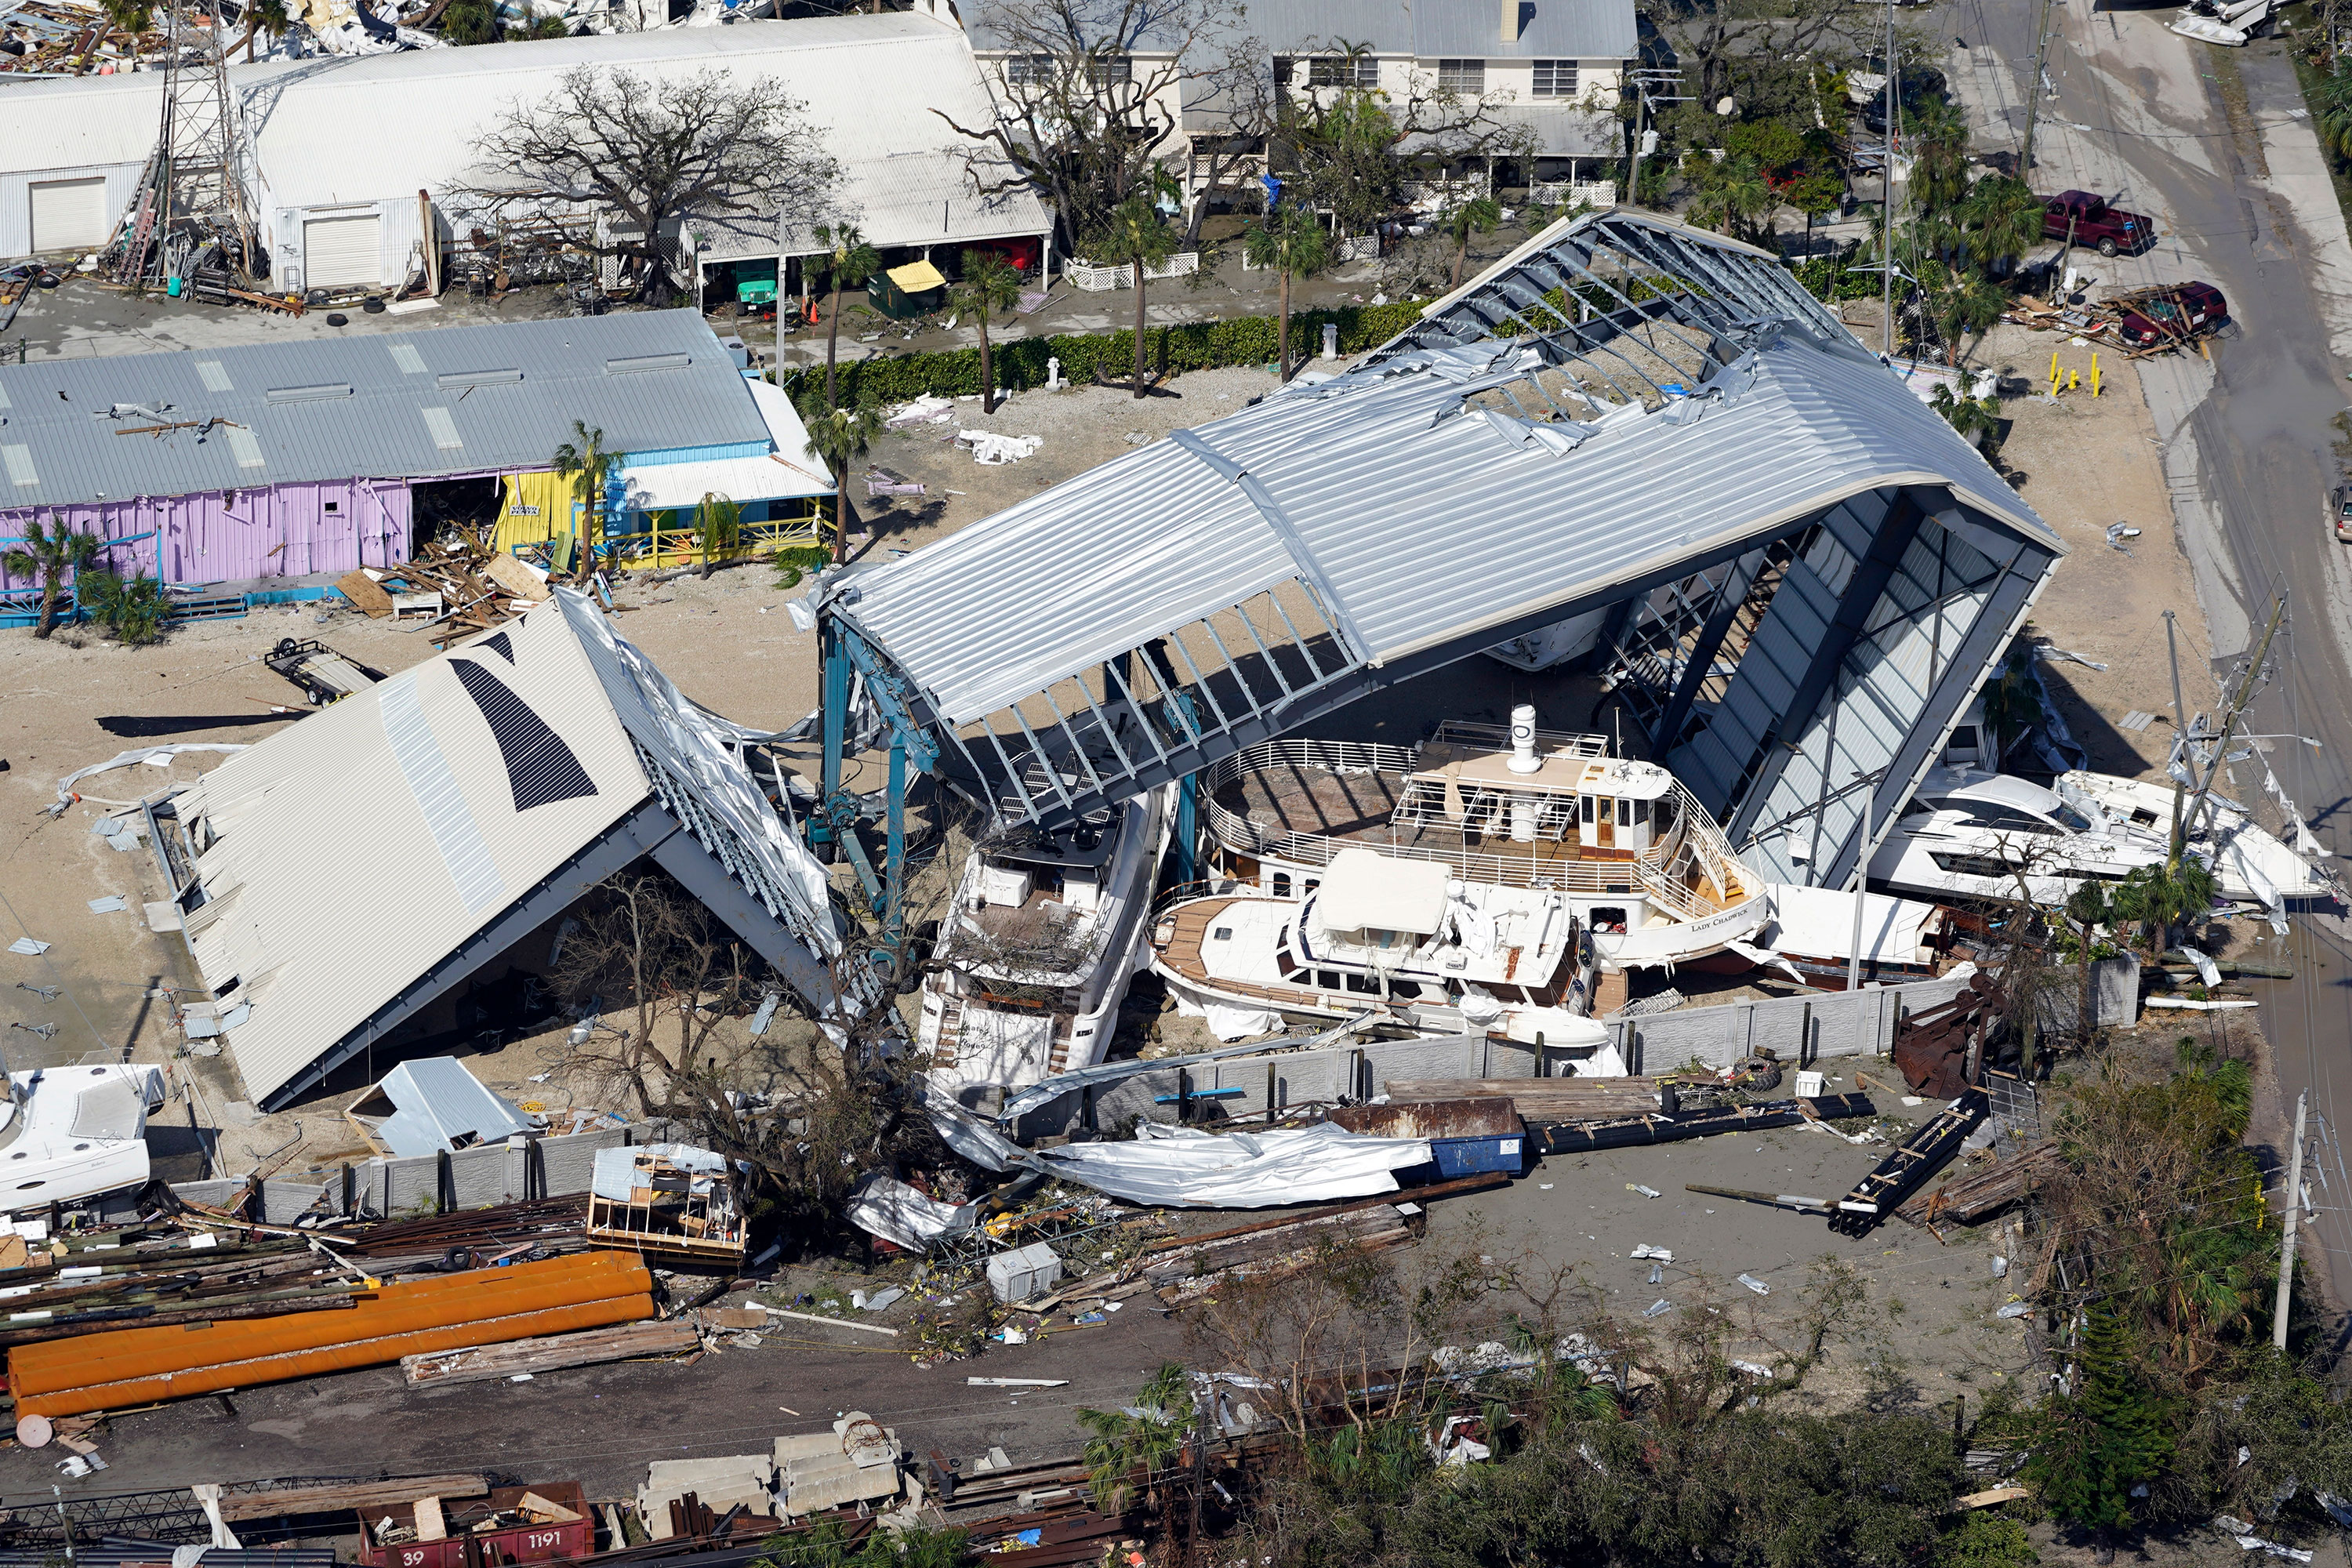 Boats are seen piled up around damaged structures in Fort Myers Beach, Florida.